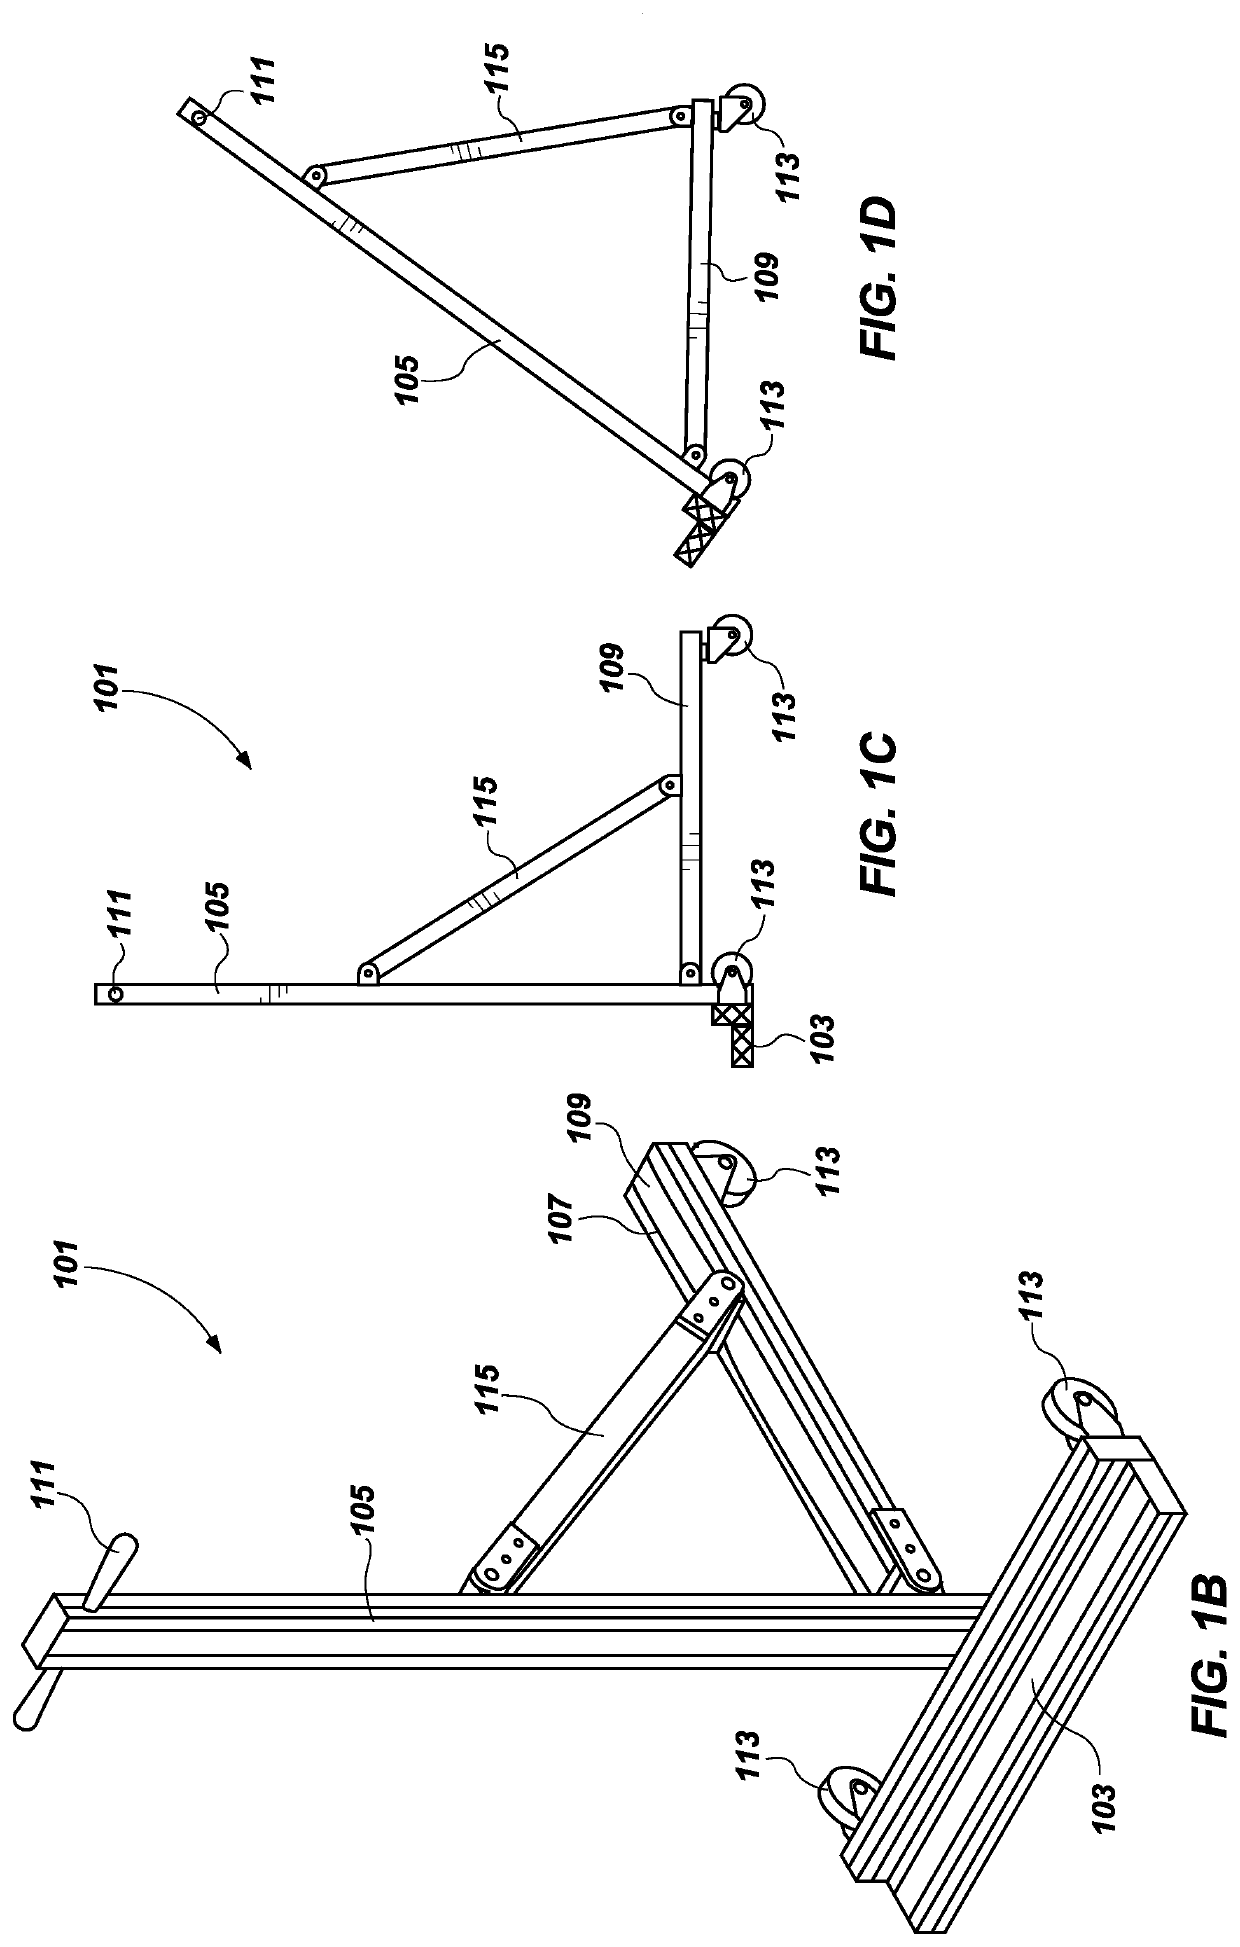 Linear delta systems, hexapod systems, and related methods